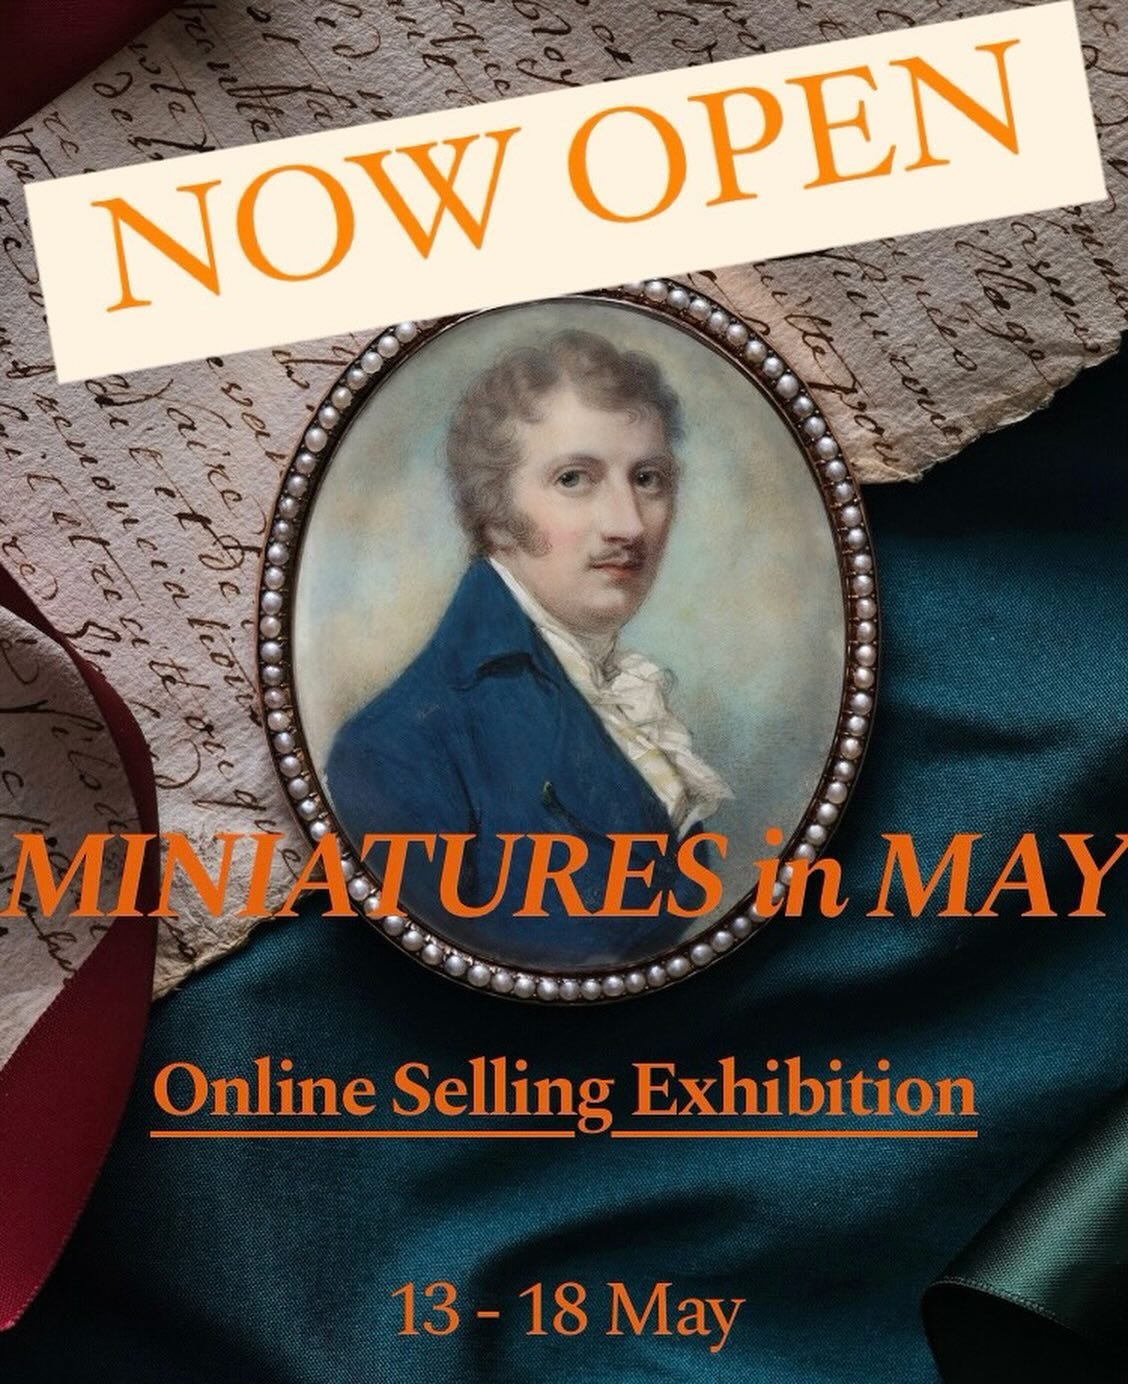 🎺 🎺 🎺 Our online selling exhibition is NOW OPEN! View via the link in our story or bio. 

Also, tonight is our first Instagram Live talk of the &lsquo;Miniatures in May&rsquo; series! Join Emma and Nick Cox of @periodportraits tonight at 5pm to le